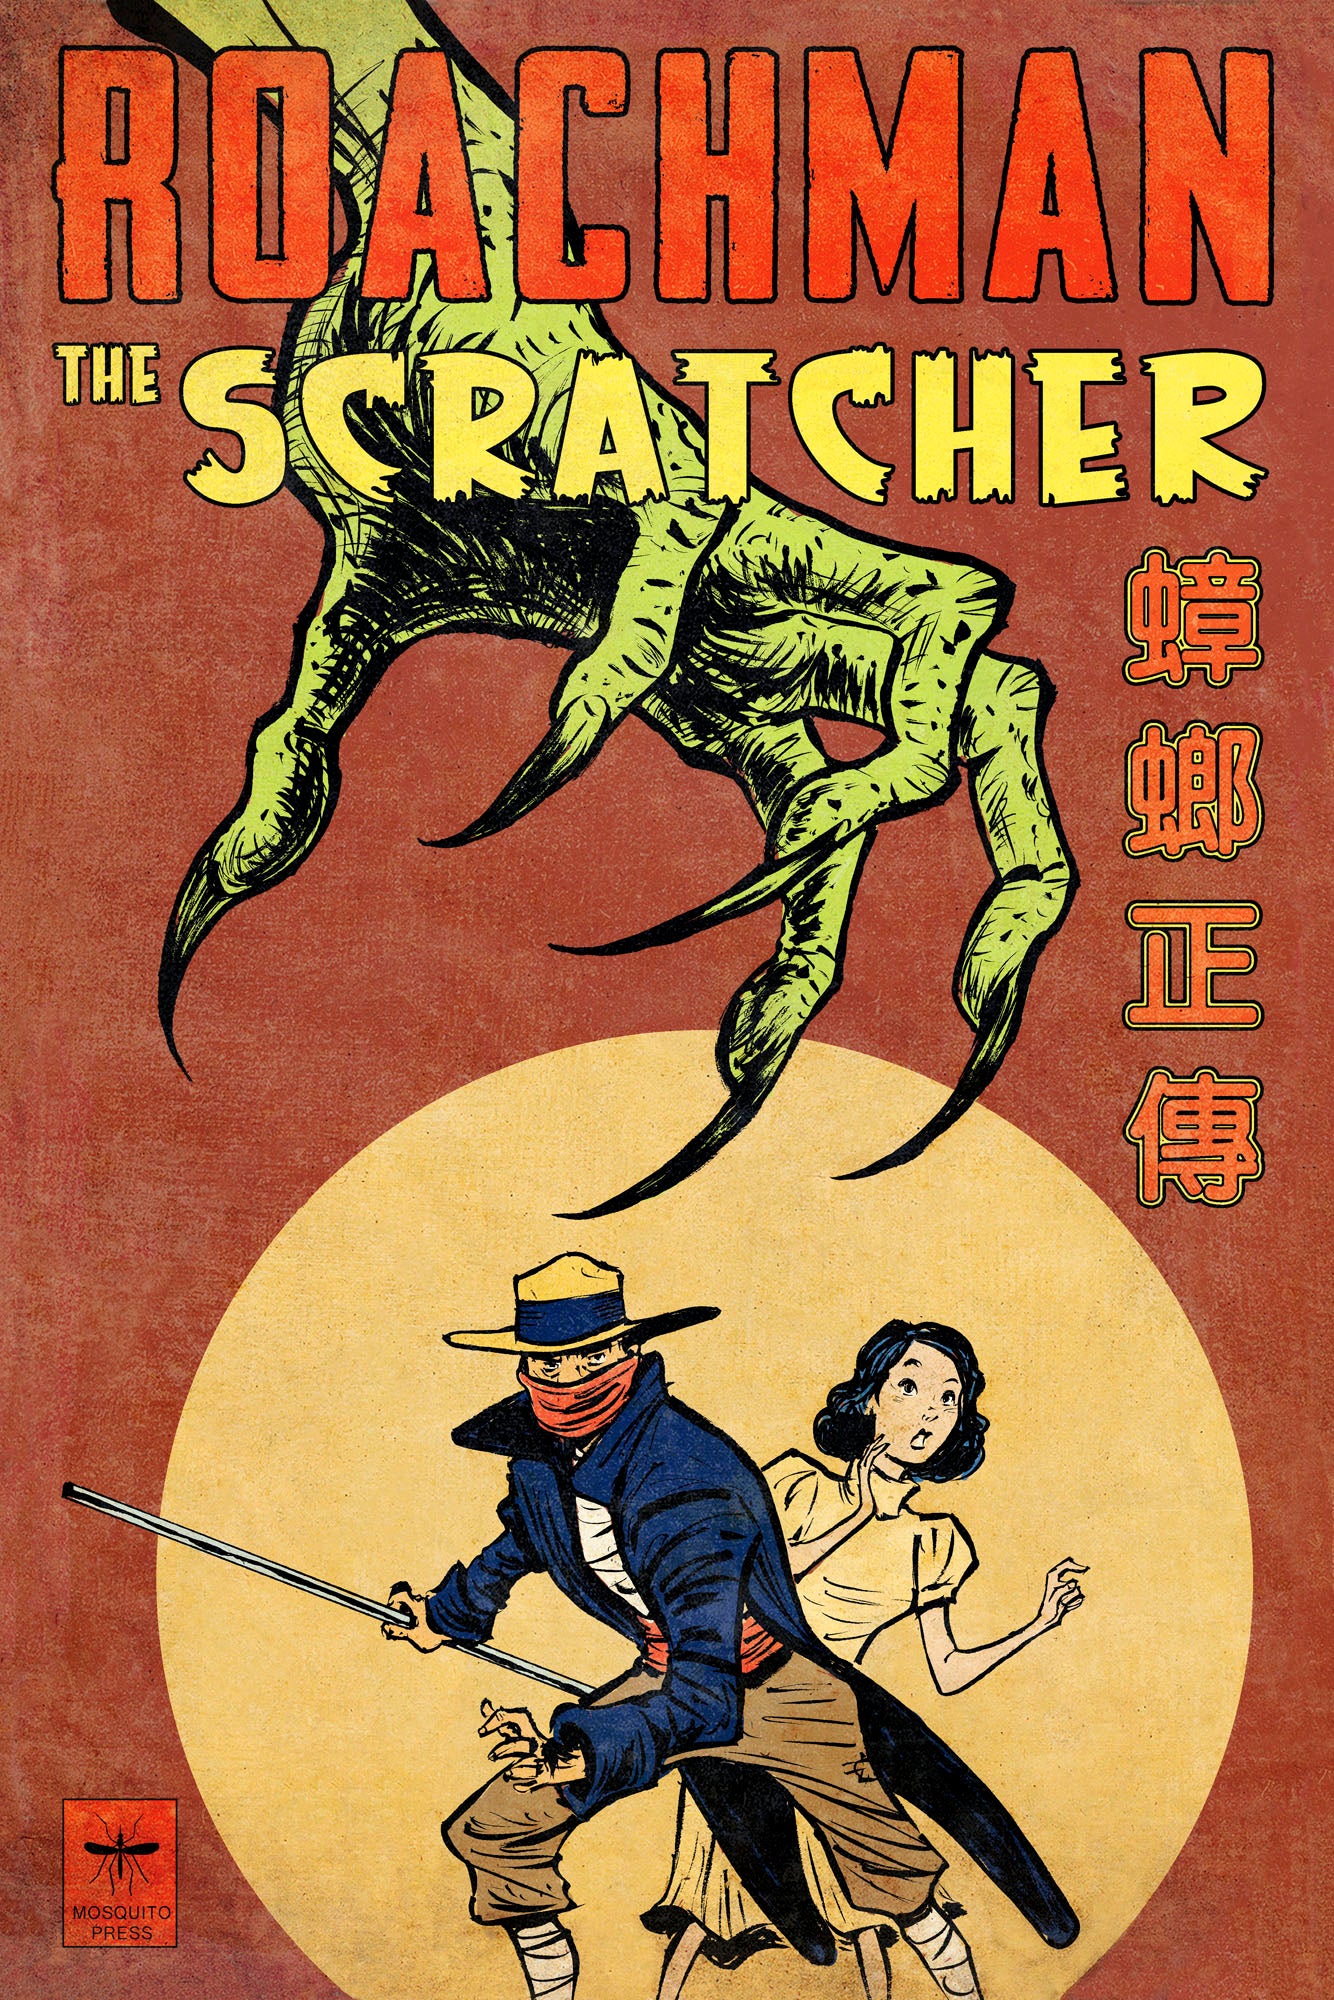 Sonny Liew, "Roachman No. 14: The Scratcher (Cover)"